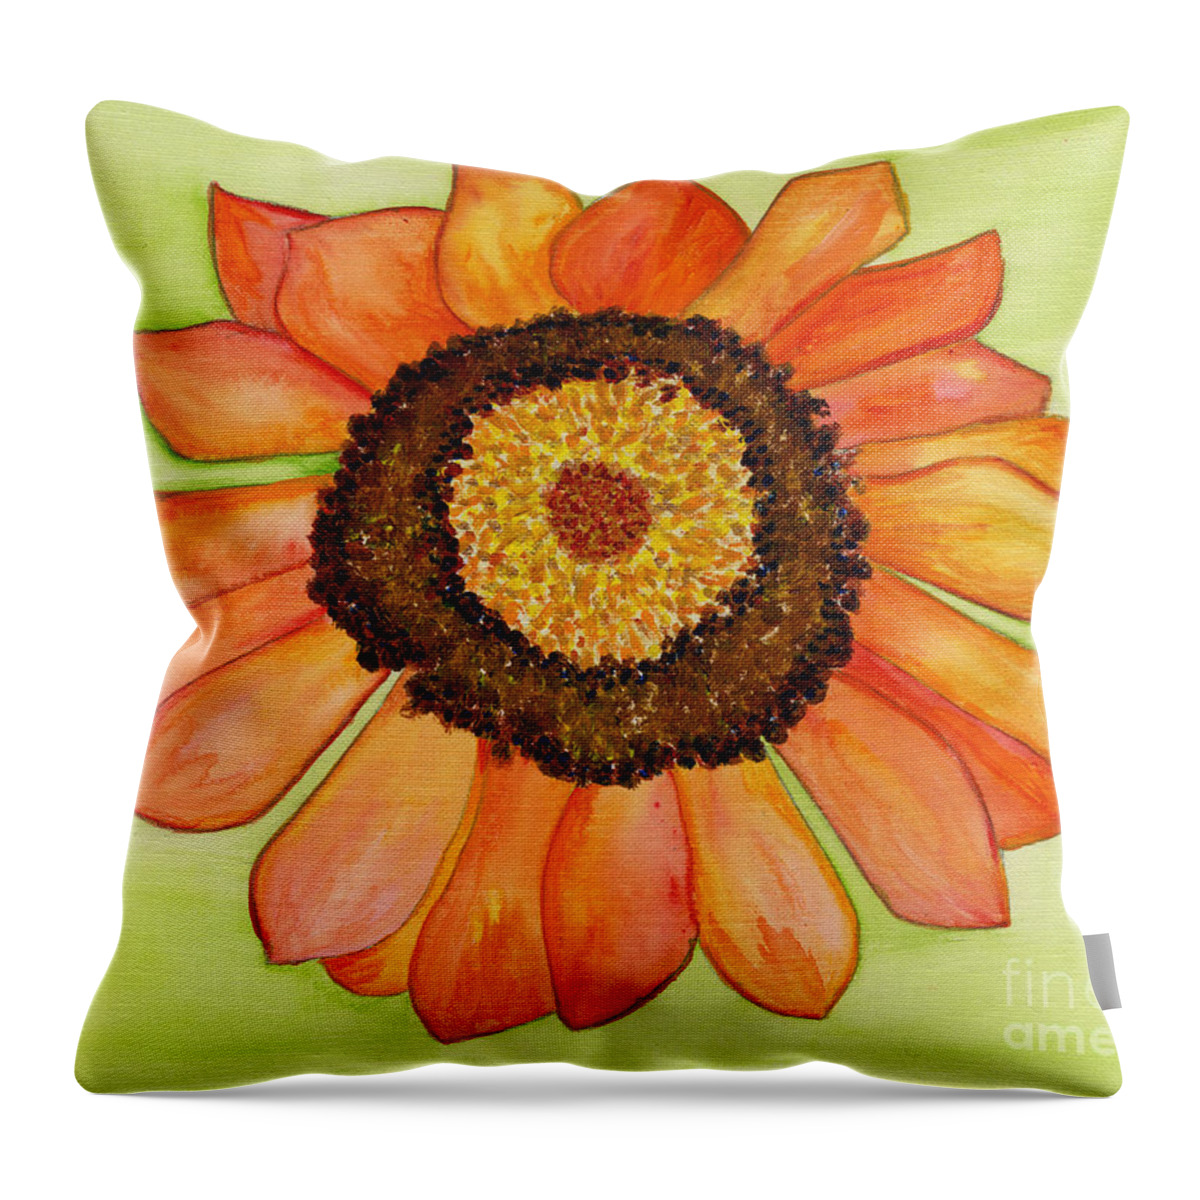 Flower Throw Pillow featuring the painting Flower Orange by Julia Stubbe